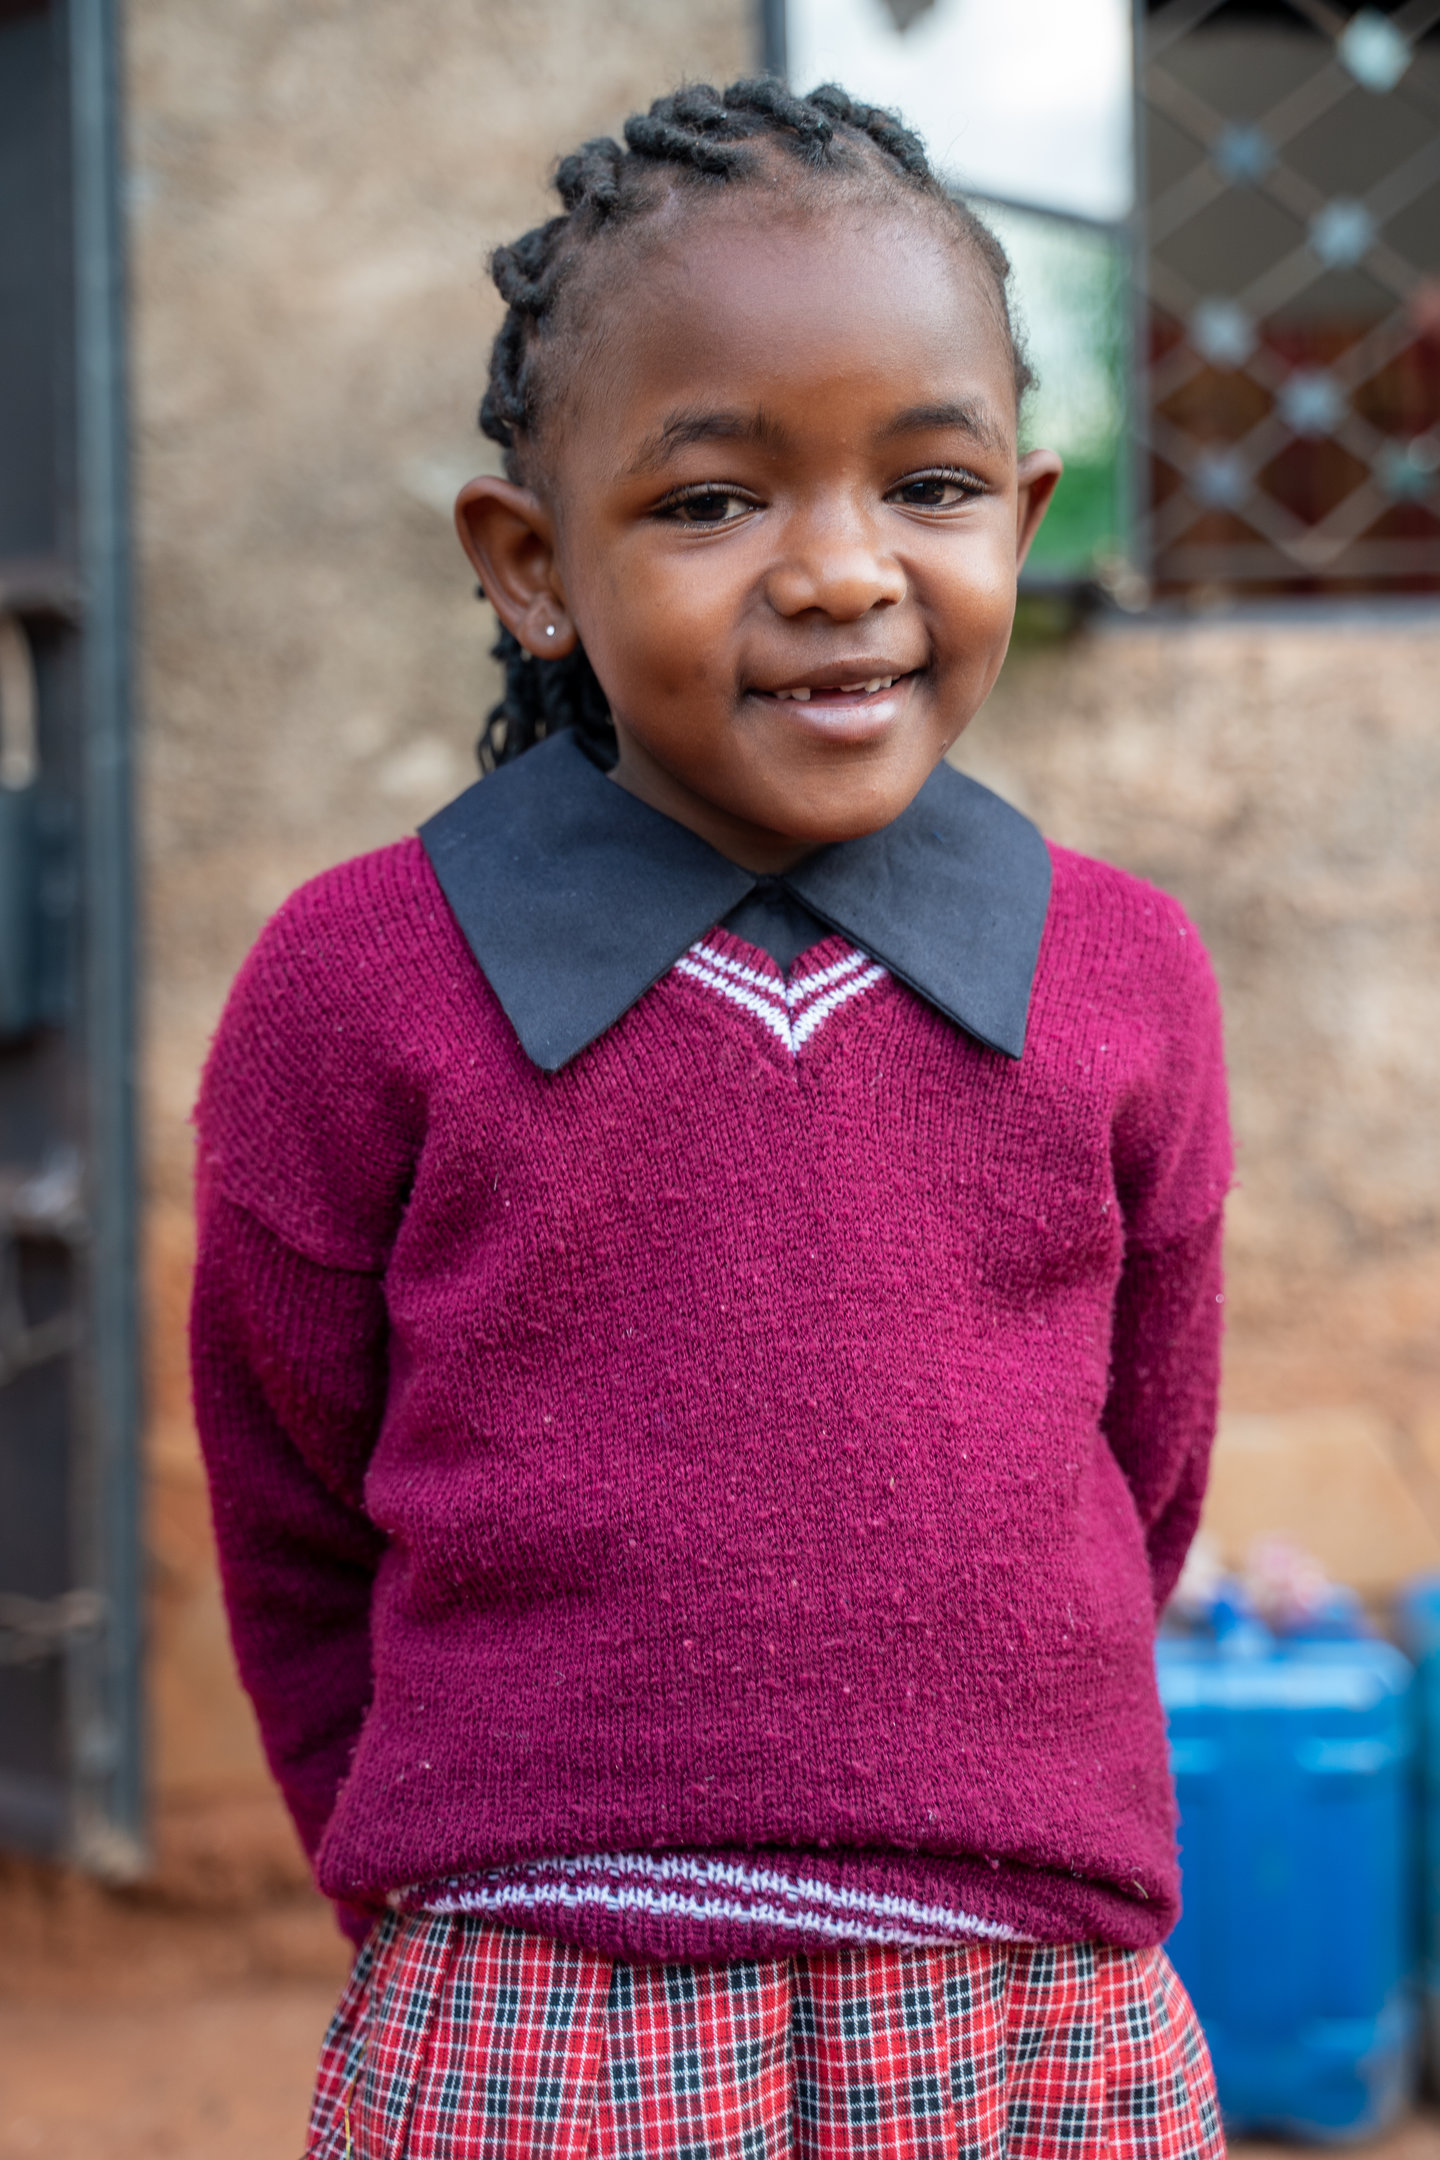 A young girl in a school uniform smiles and looks at the camera.